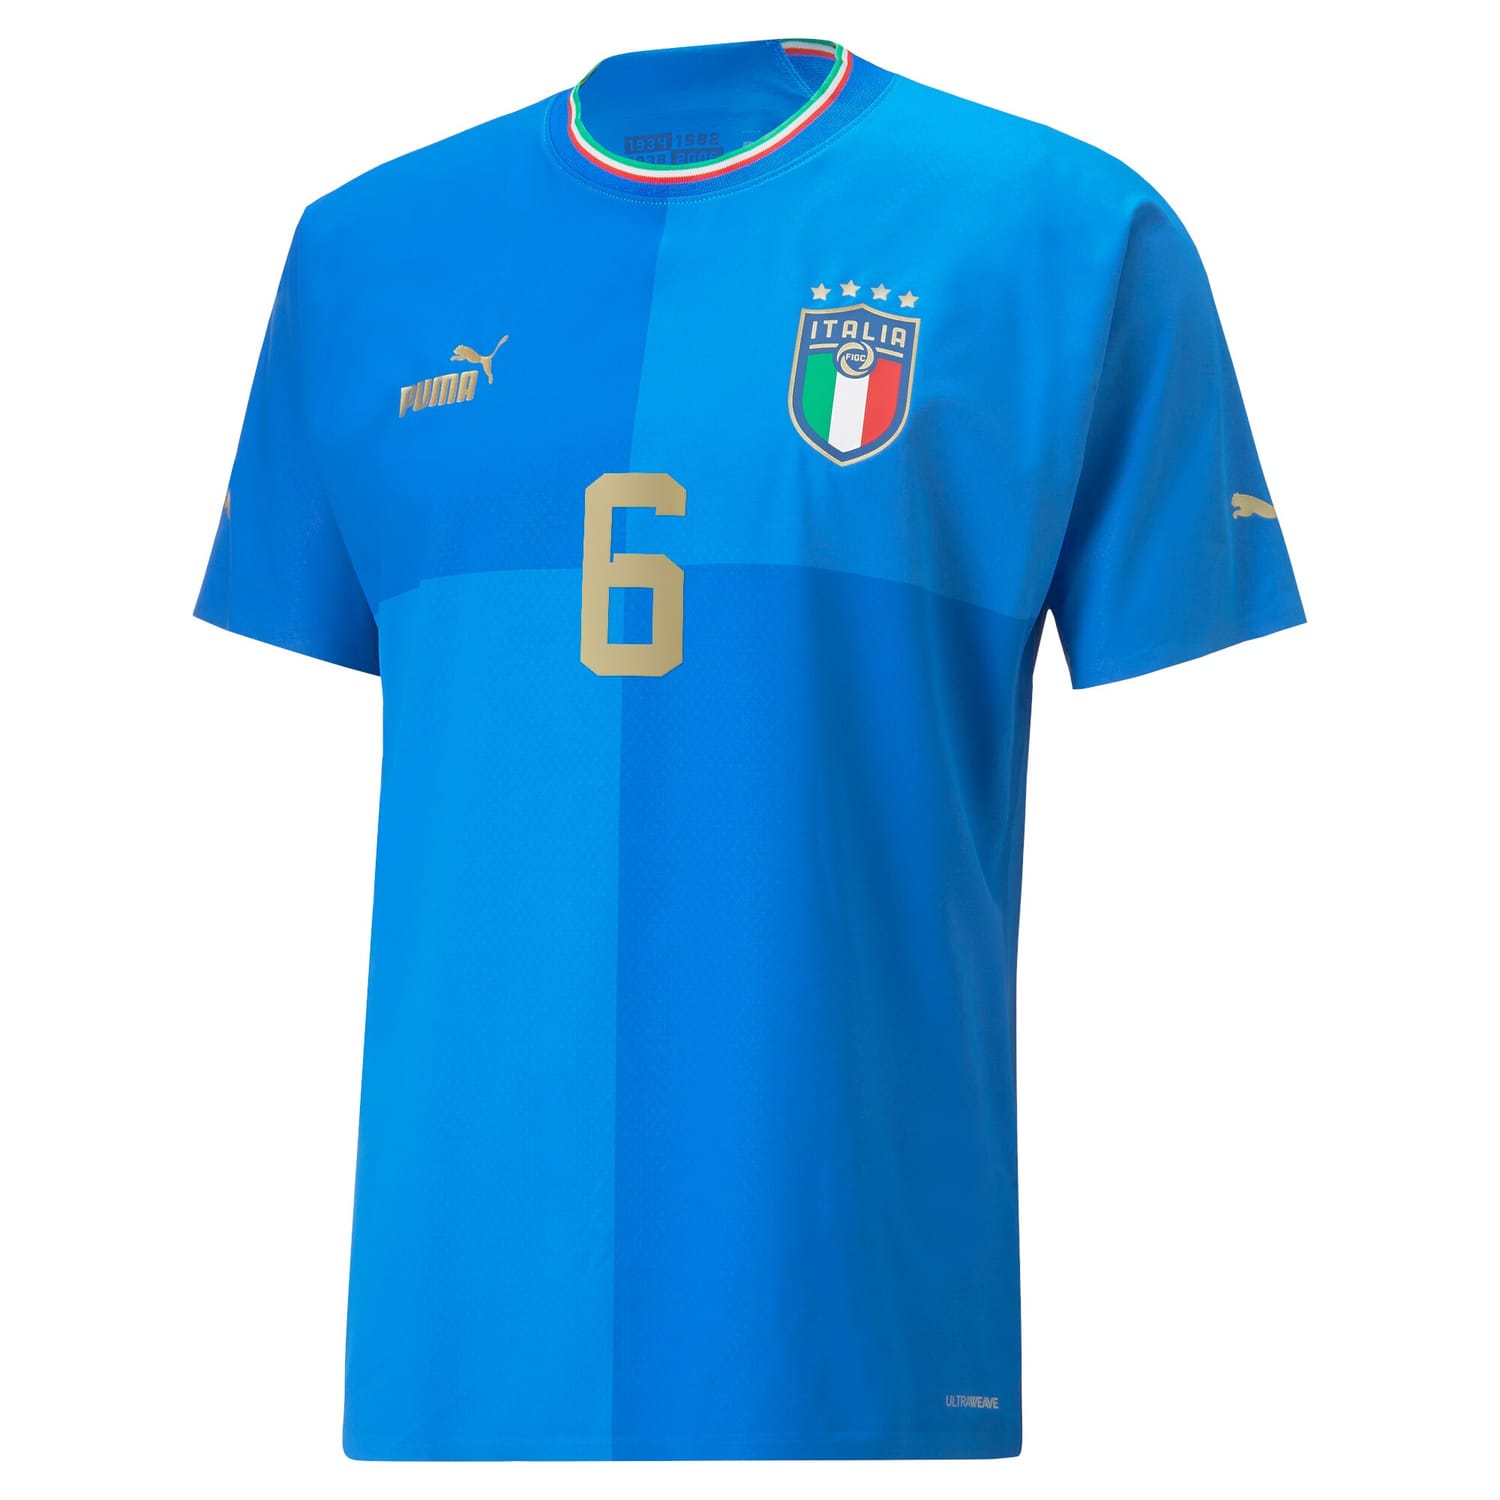 Italy National Team Home Authentic Jersey Shirt player Verratti 6 printing for Men